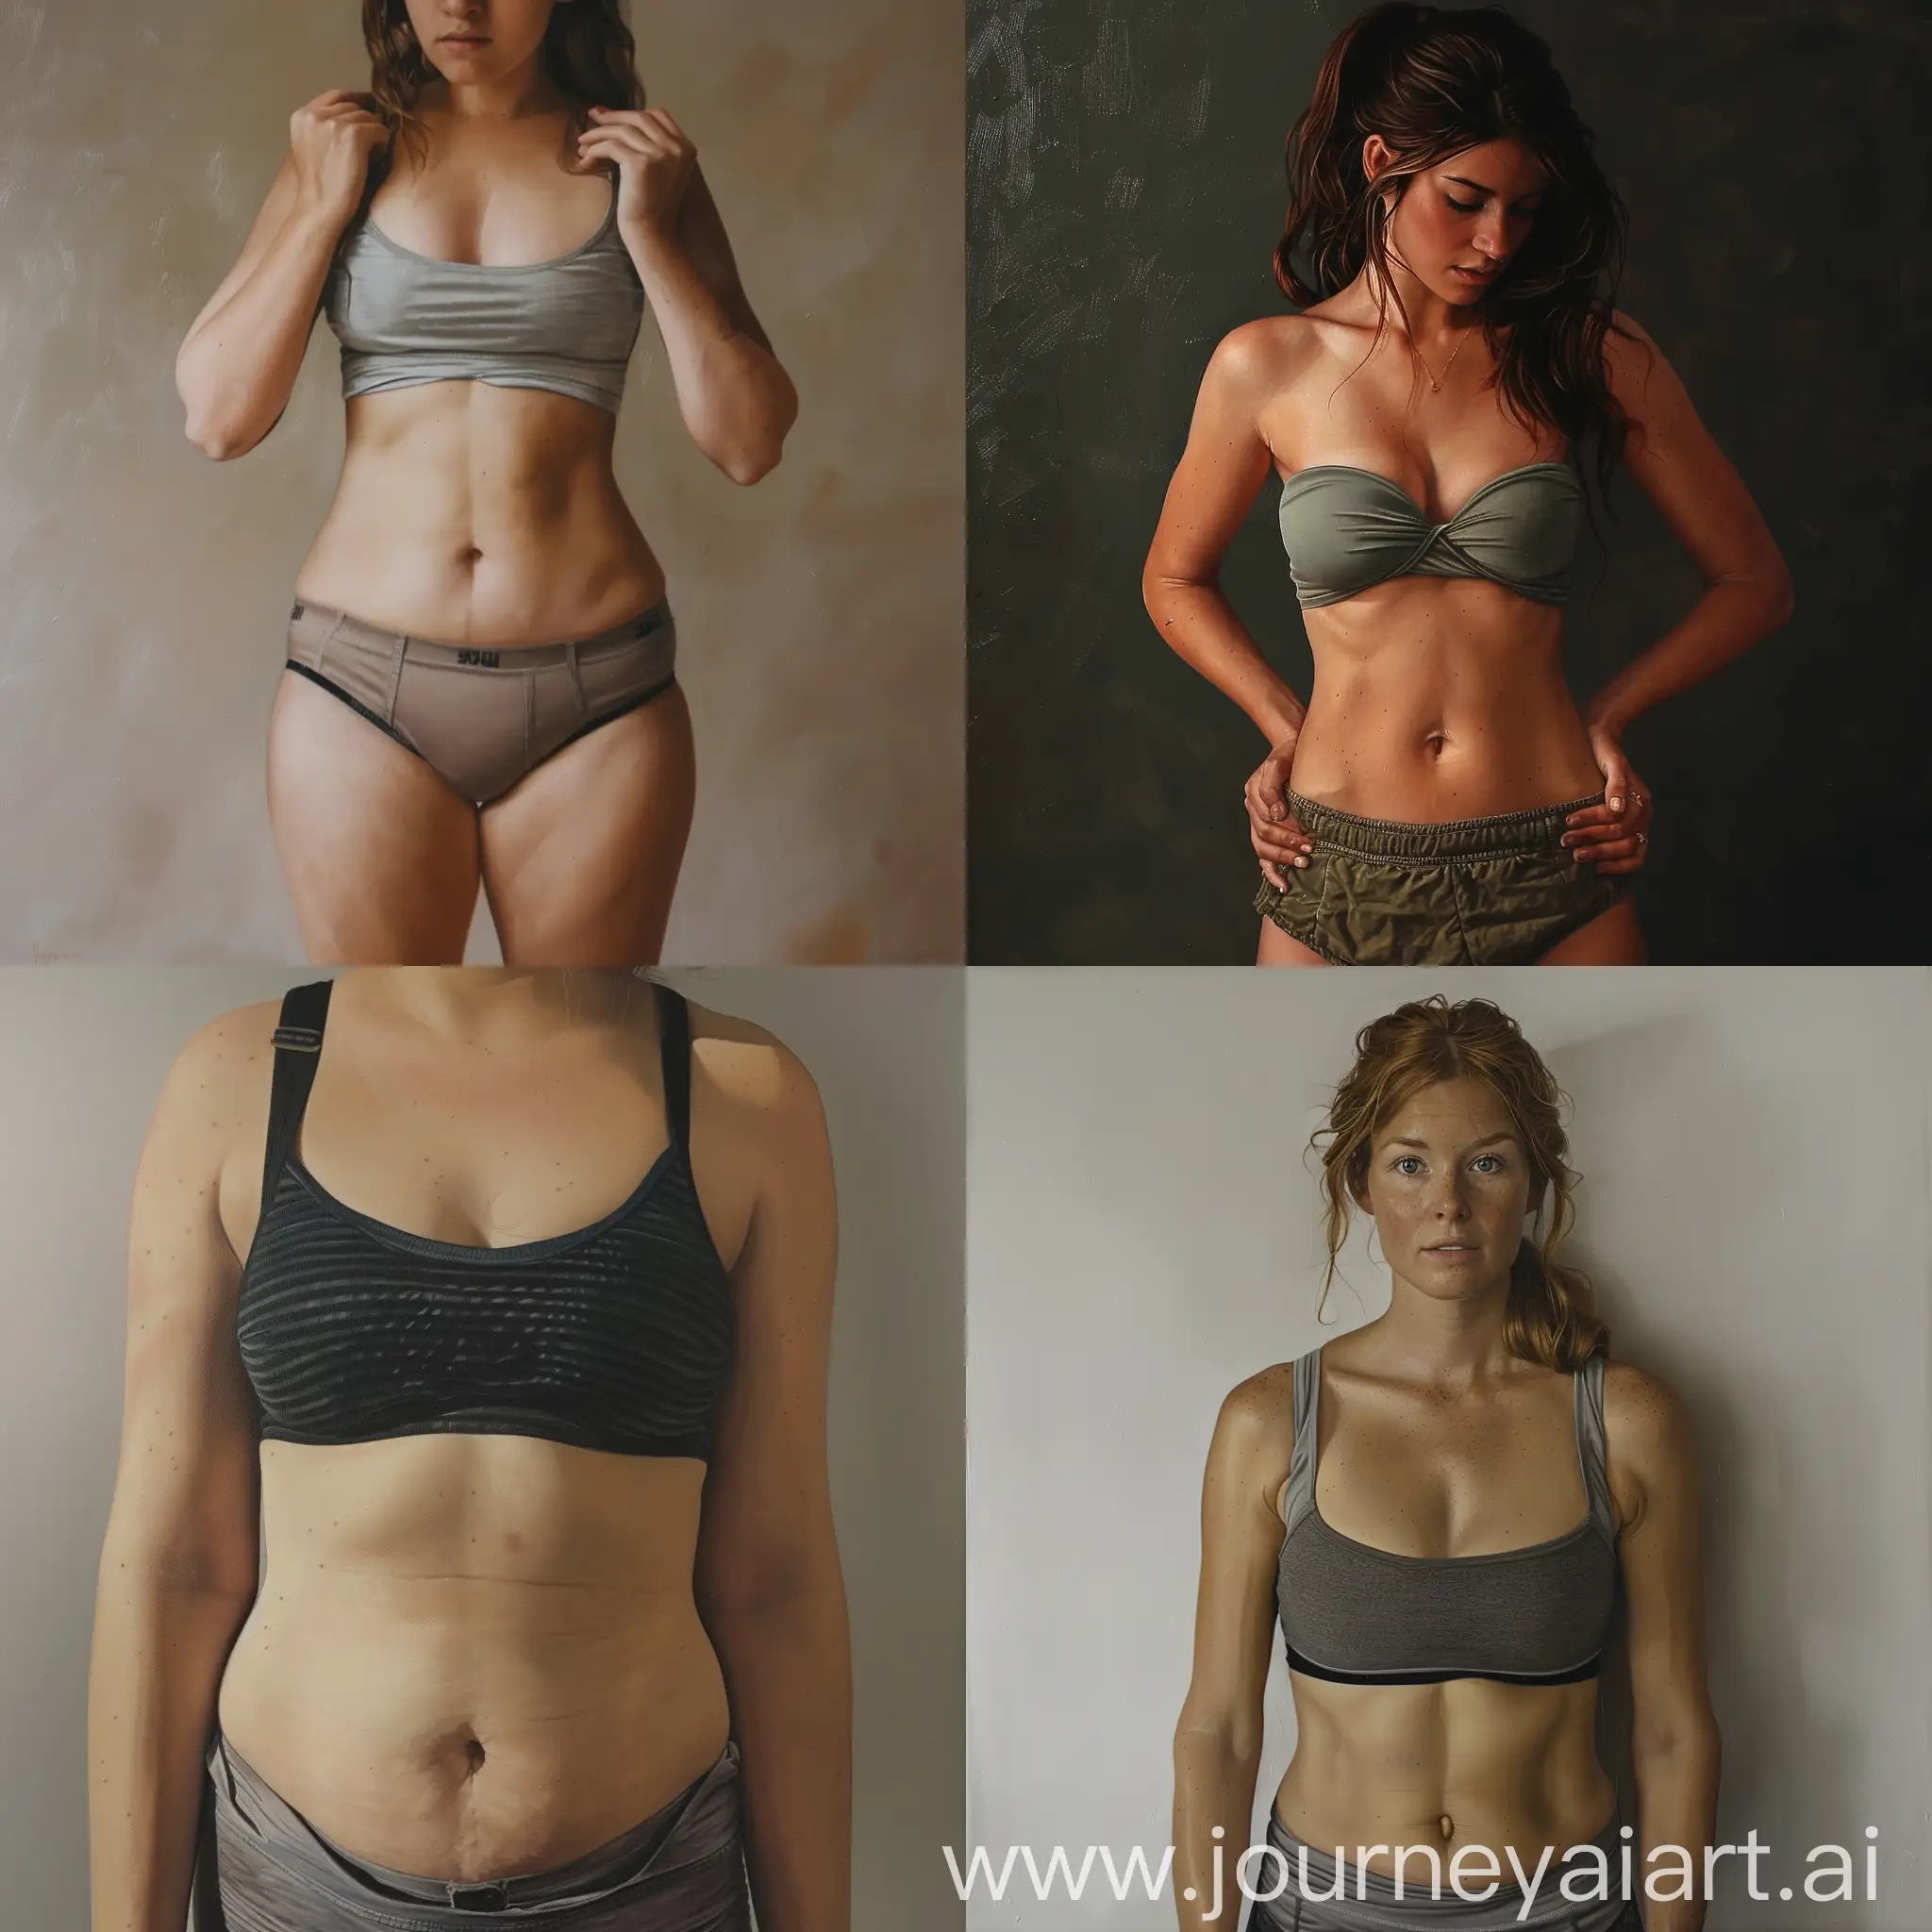 Realistic-Female-Flat-Stomach-Illustration-with-Subtle-Lighting